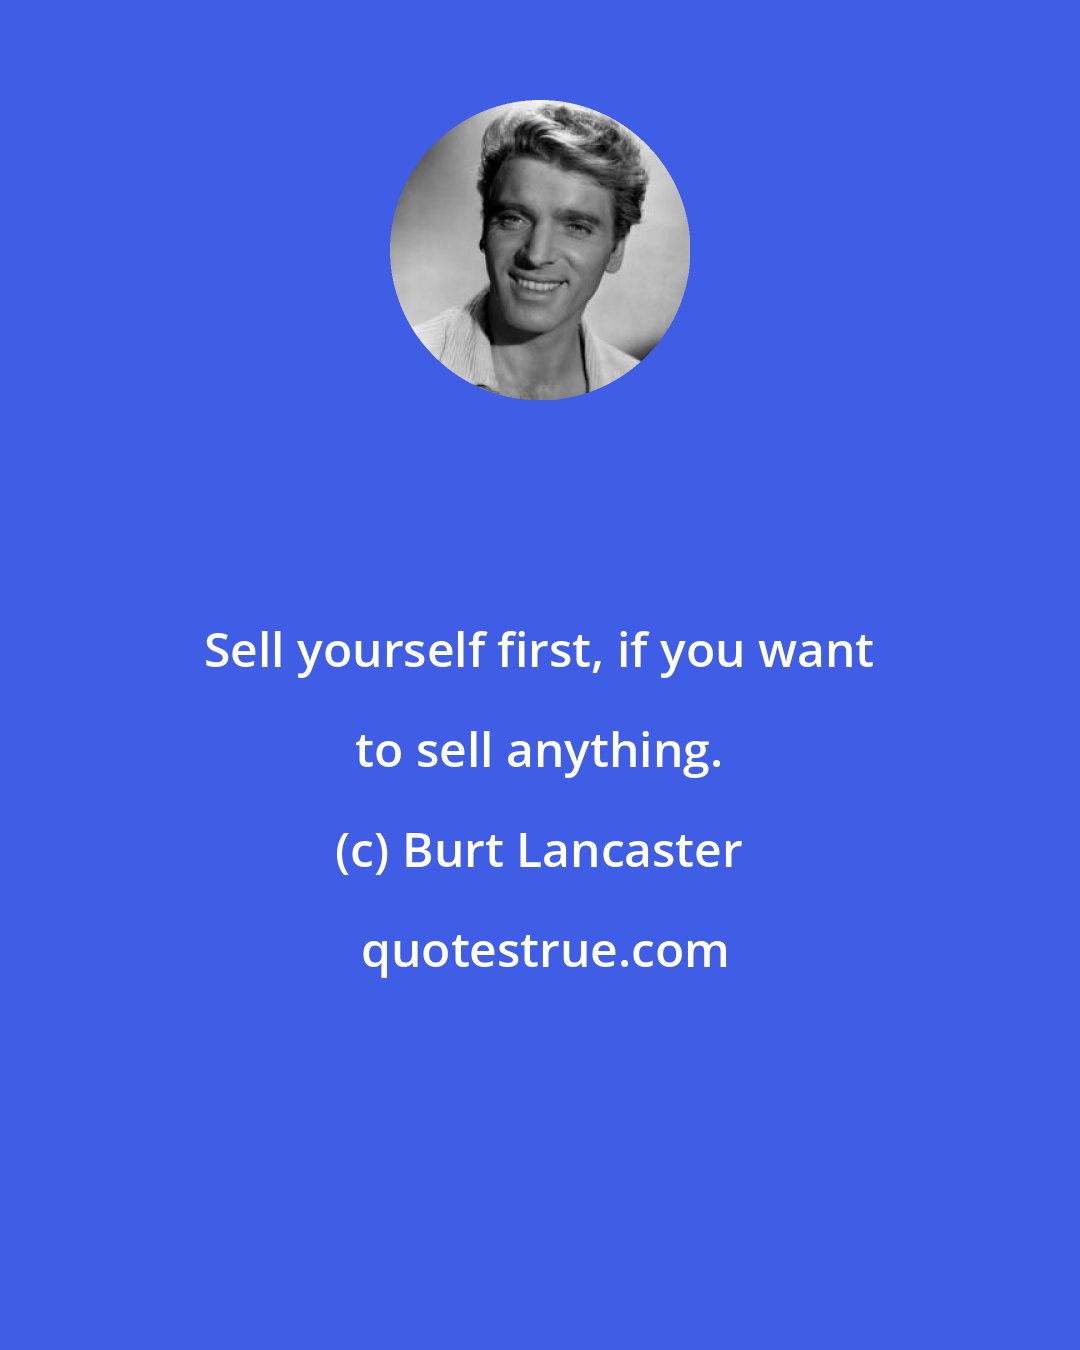 Burt Lancaster: Sell yourself first, if you want to sell anything.